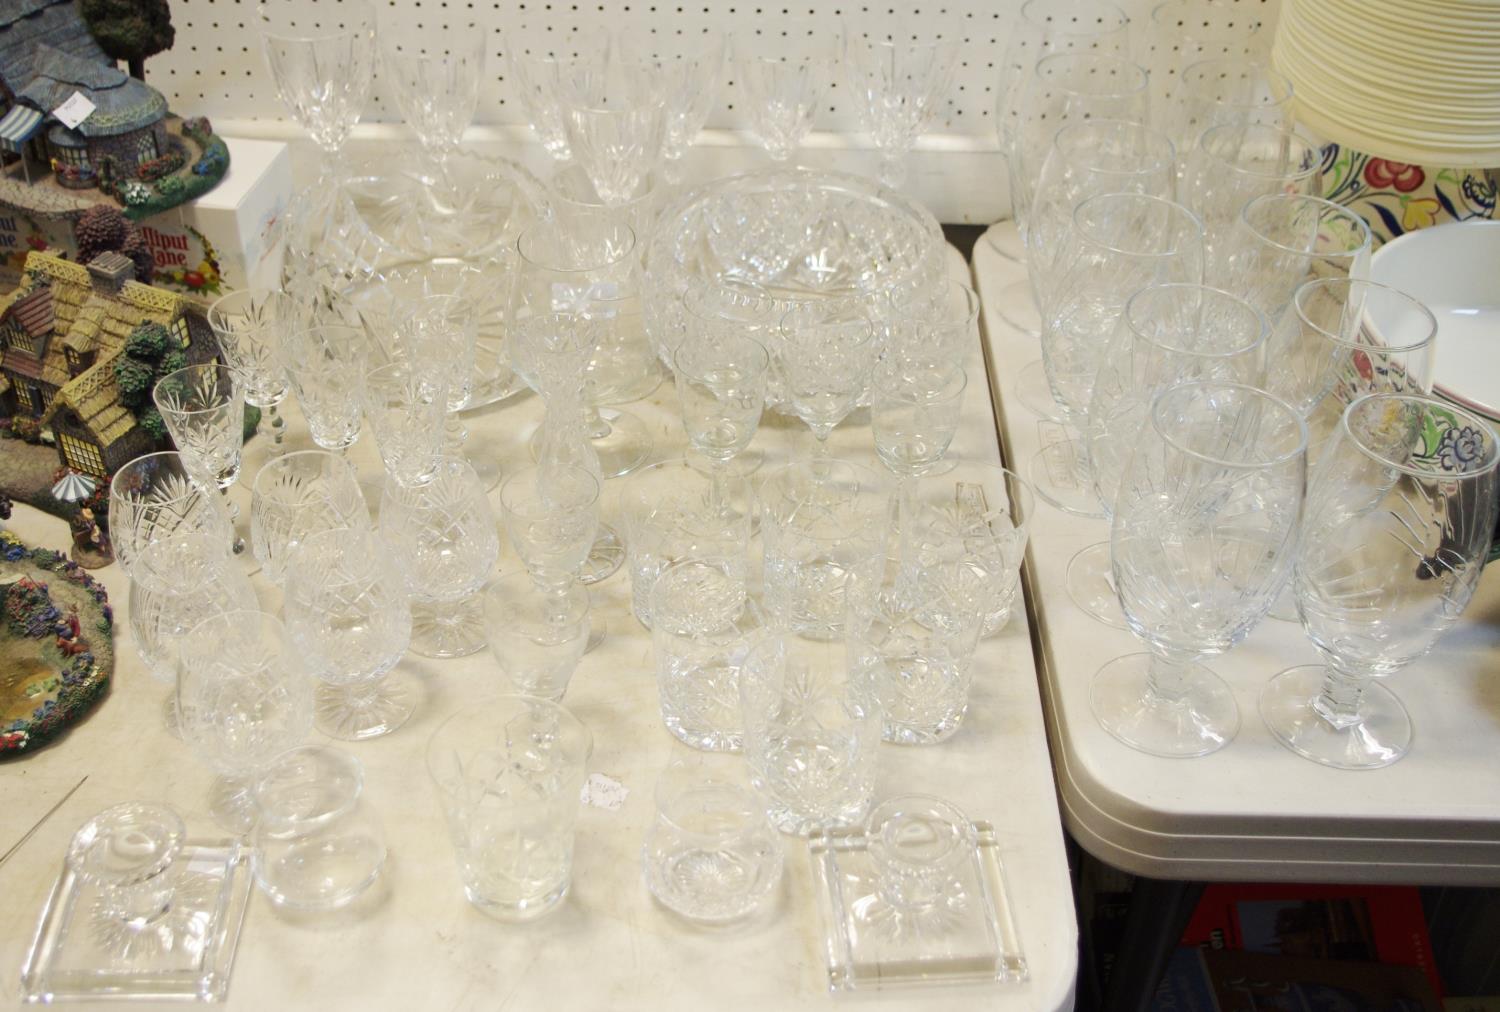 Glass ware - cut glass wine, brandy, whisky tumblers; Stella Artois chalices; dishes etc.